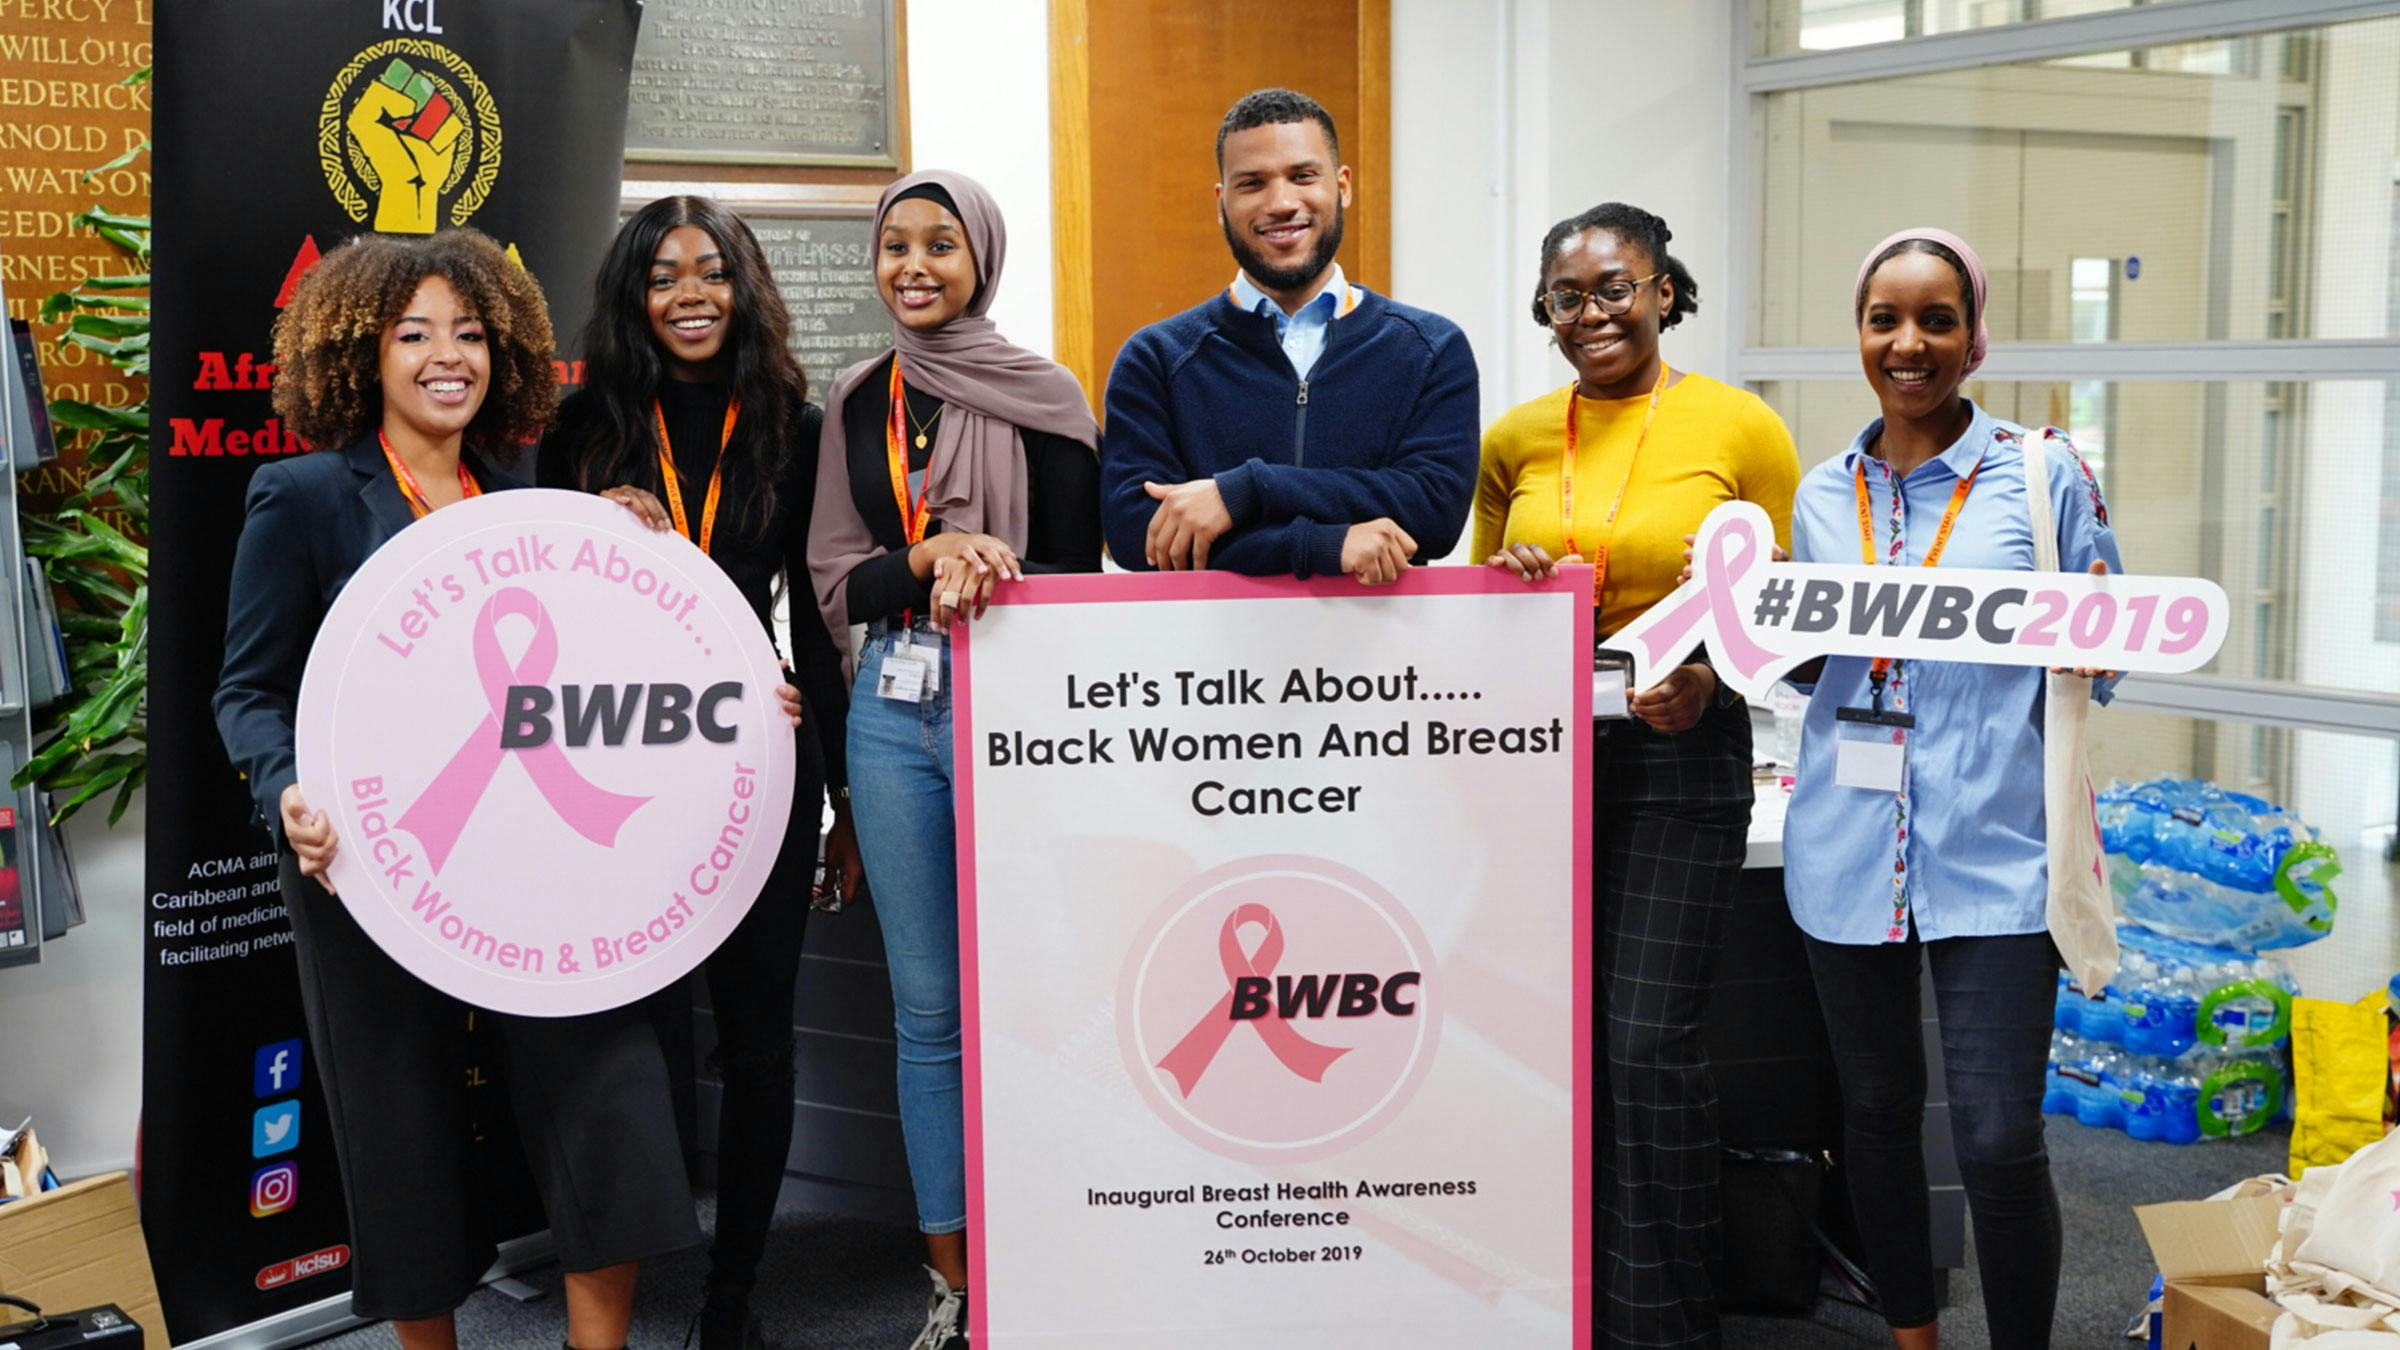 Black women and breast cancer group photo 